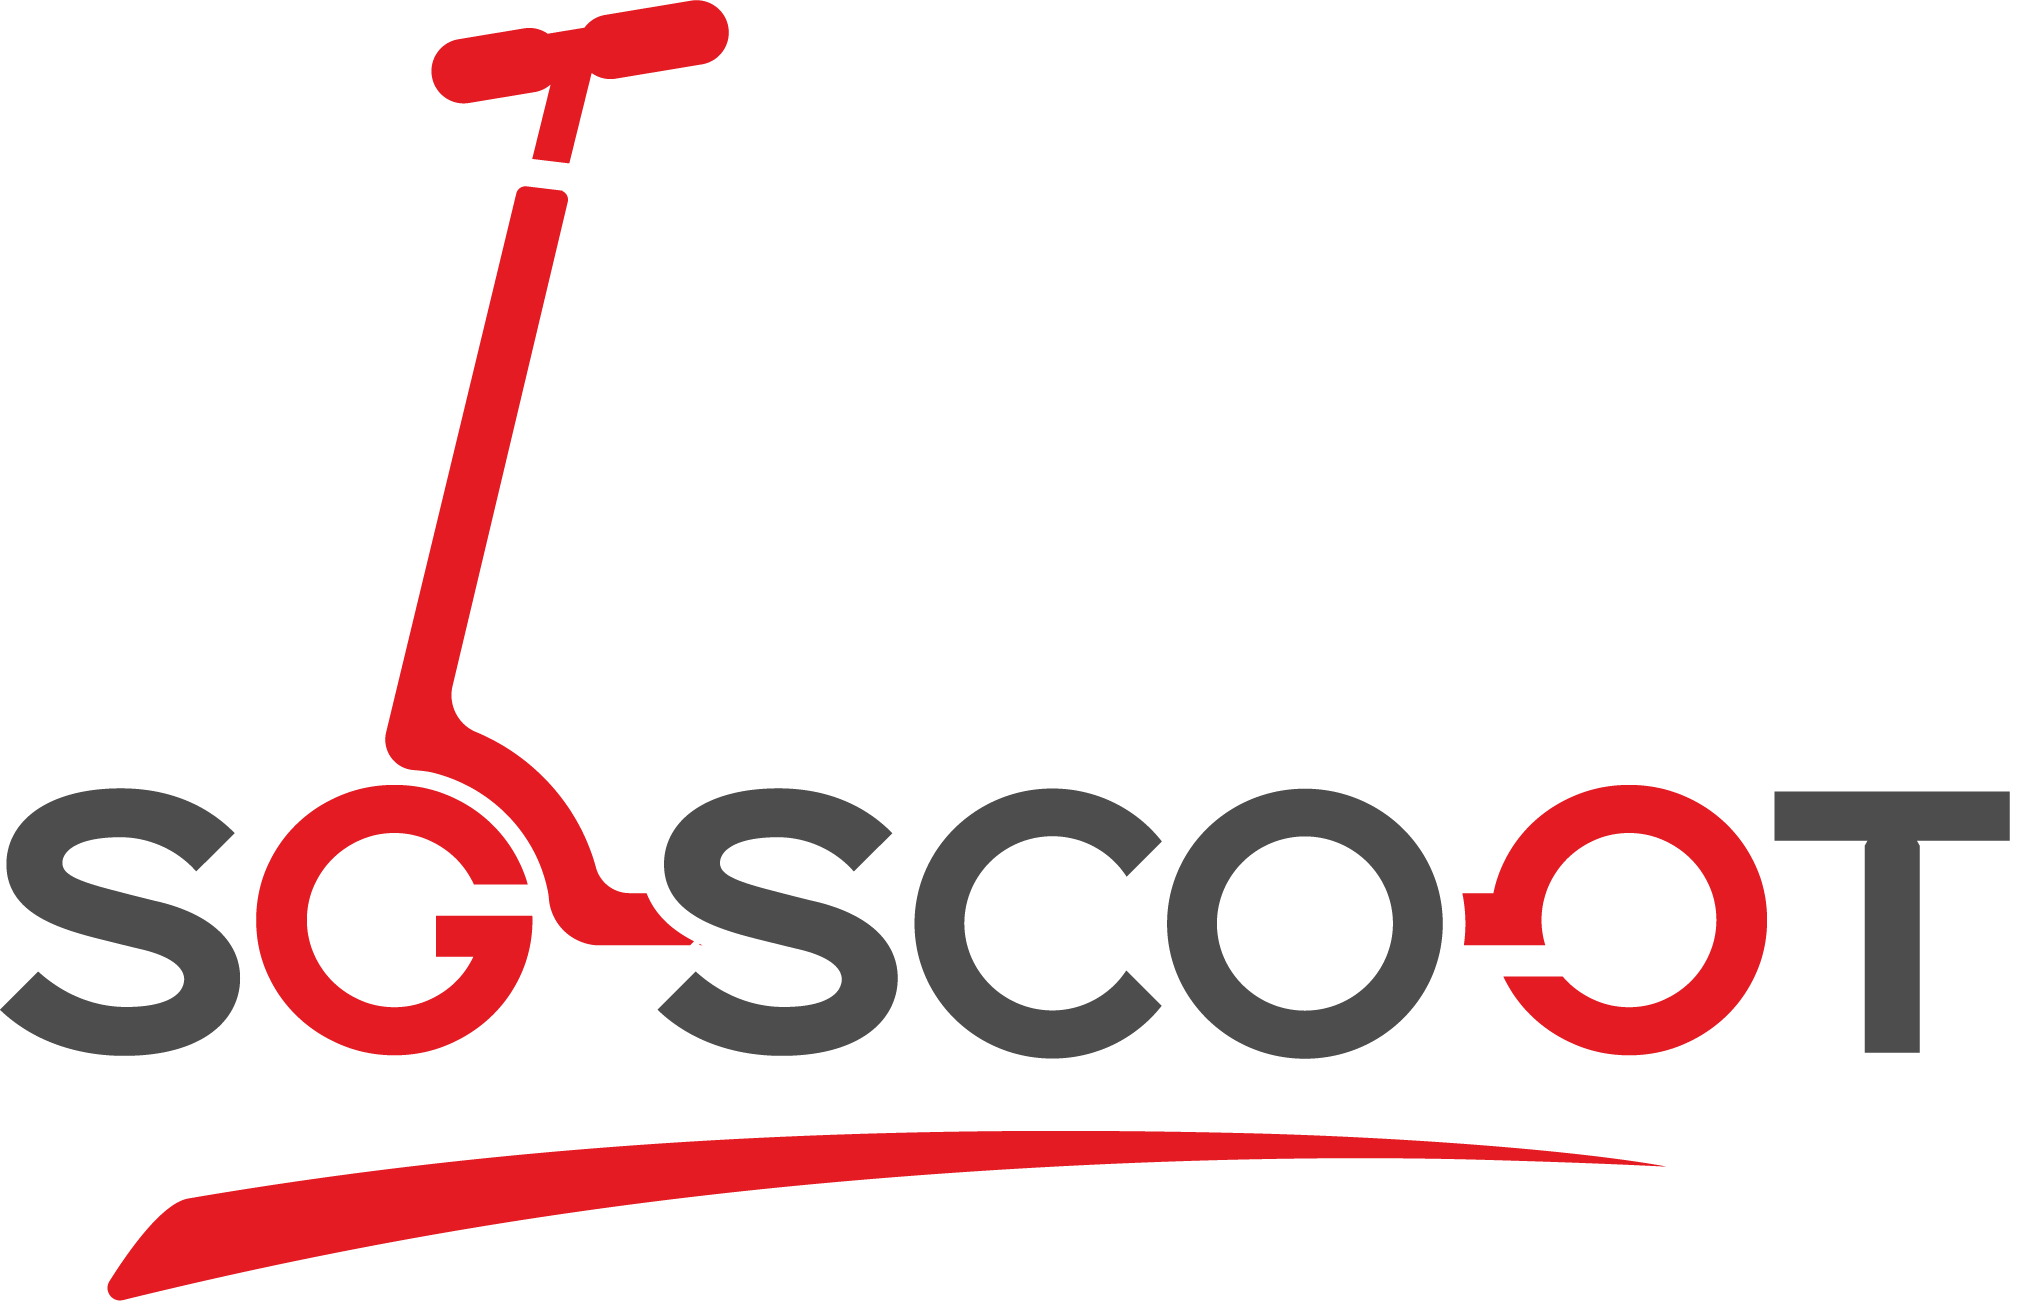 March sg electric scooters. E clipart scooter